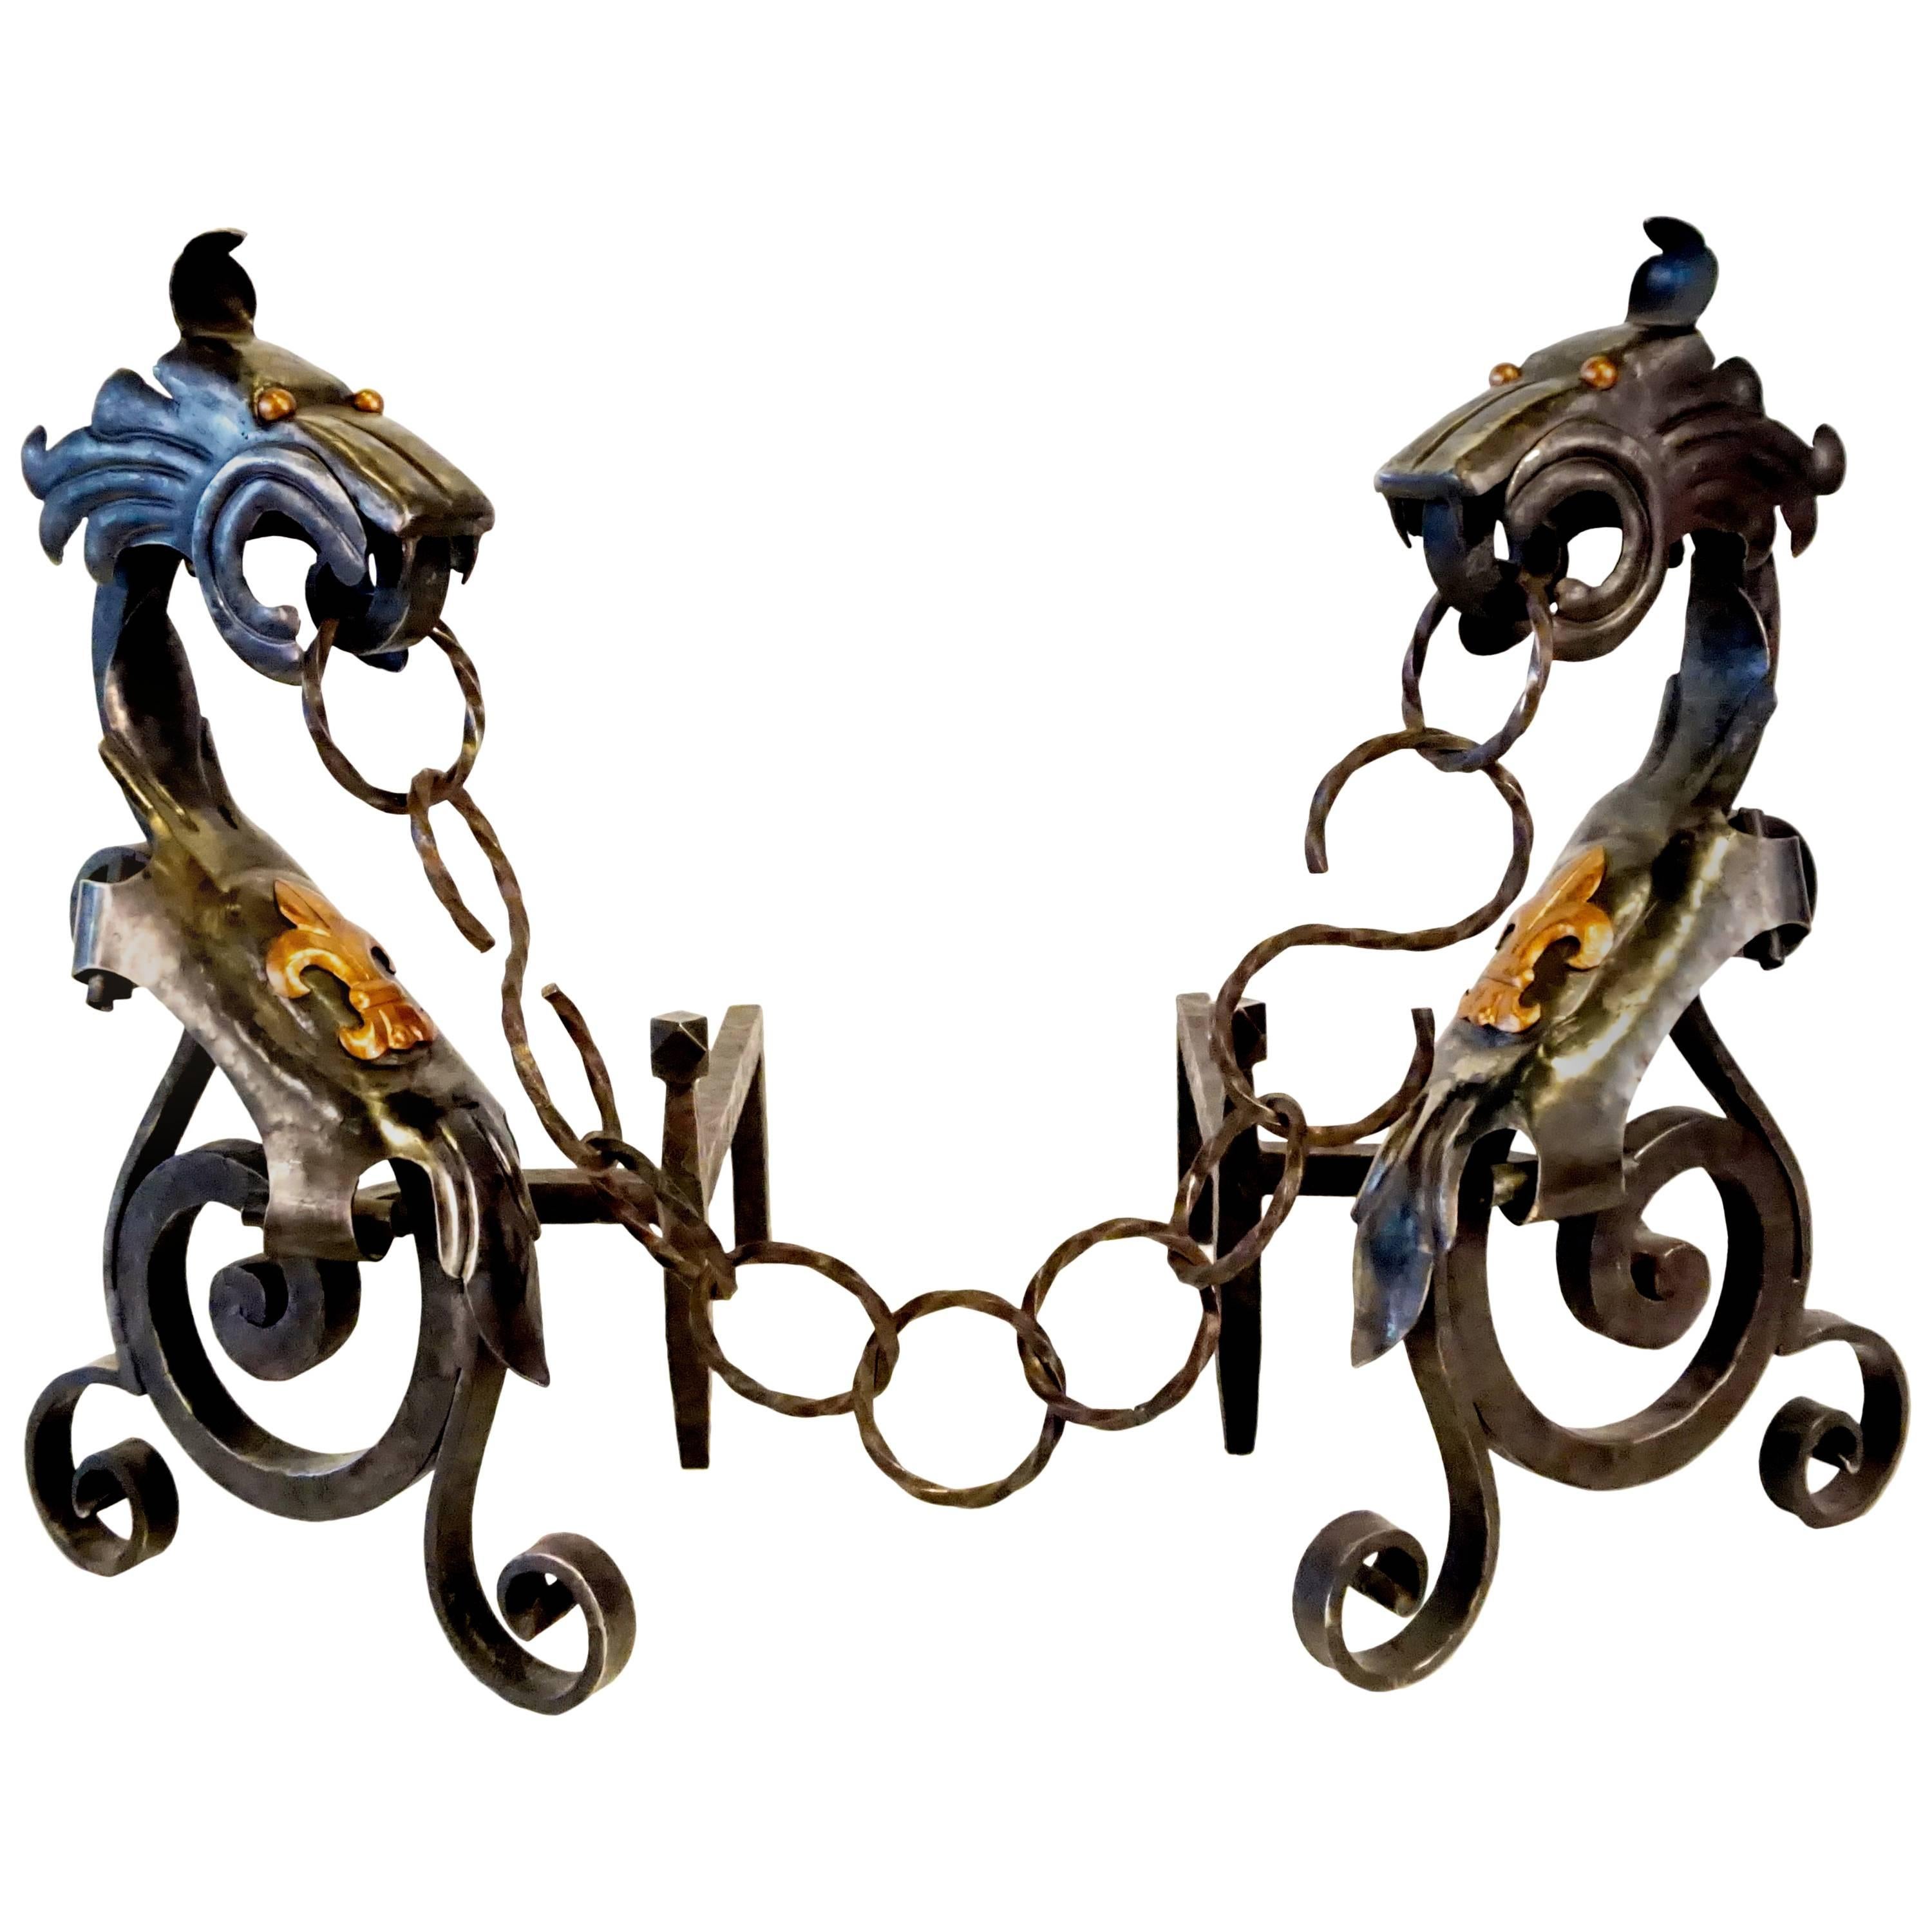 Spectacular Pair of Wrought Iron Gothic Revival Dragon Andirons For Sale